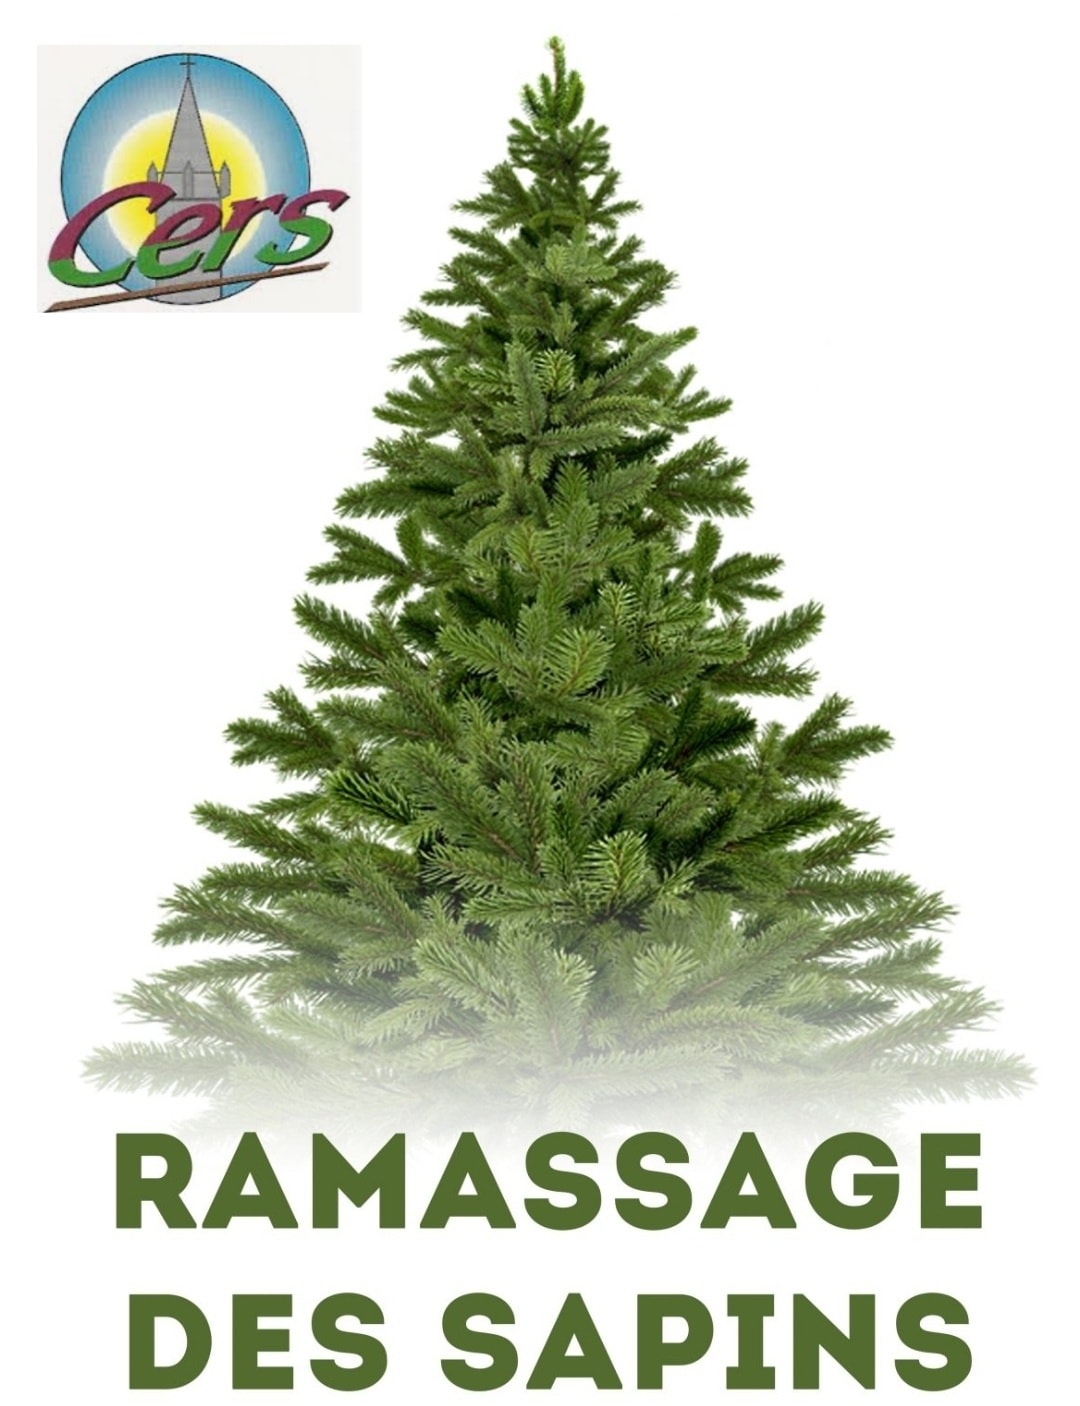 You are currently viewing Ramassage des sapins les 7 et 12 janvier